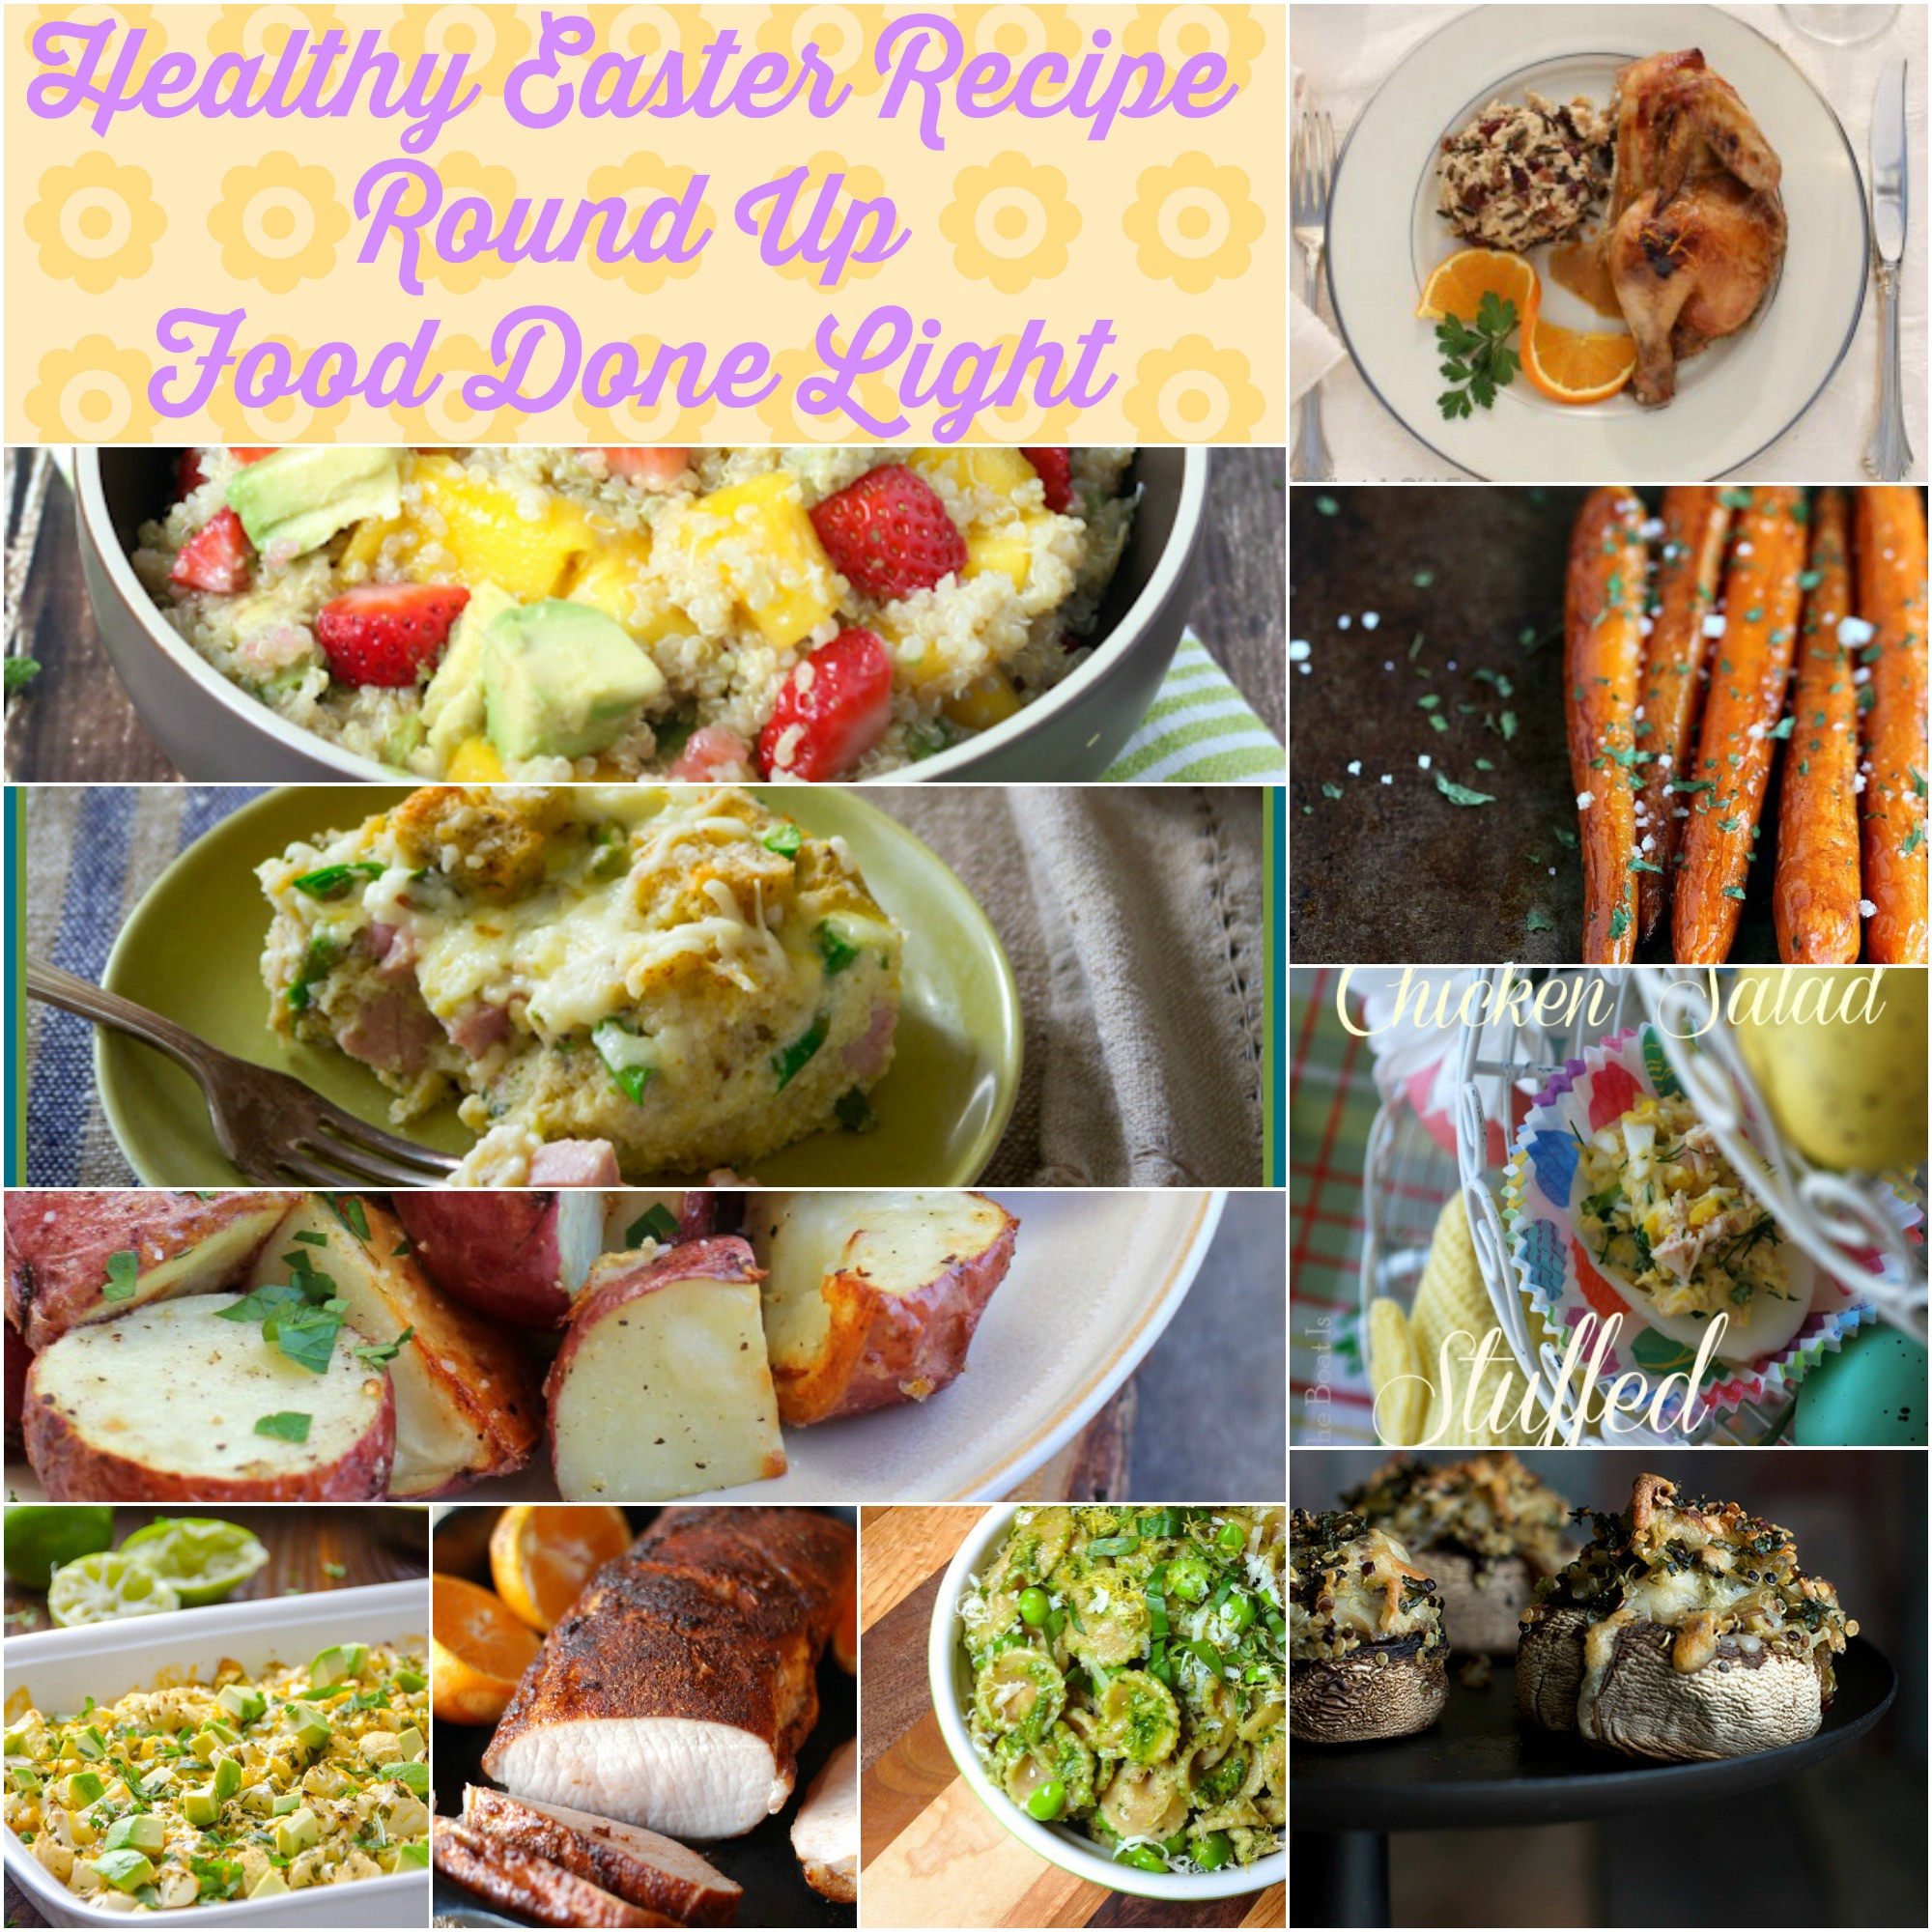 Cooking Light Easter Dinner
 Healthy Easter Recipe Round Up Food Done Light